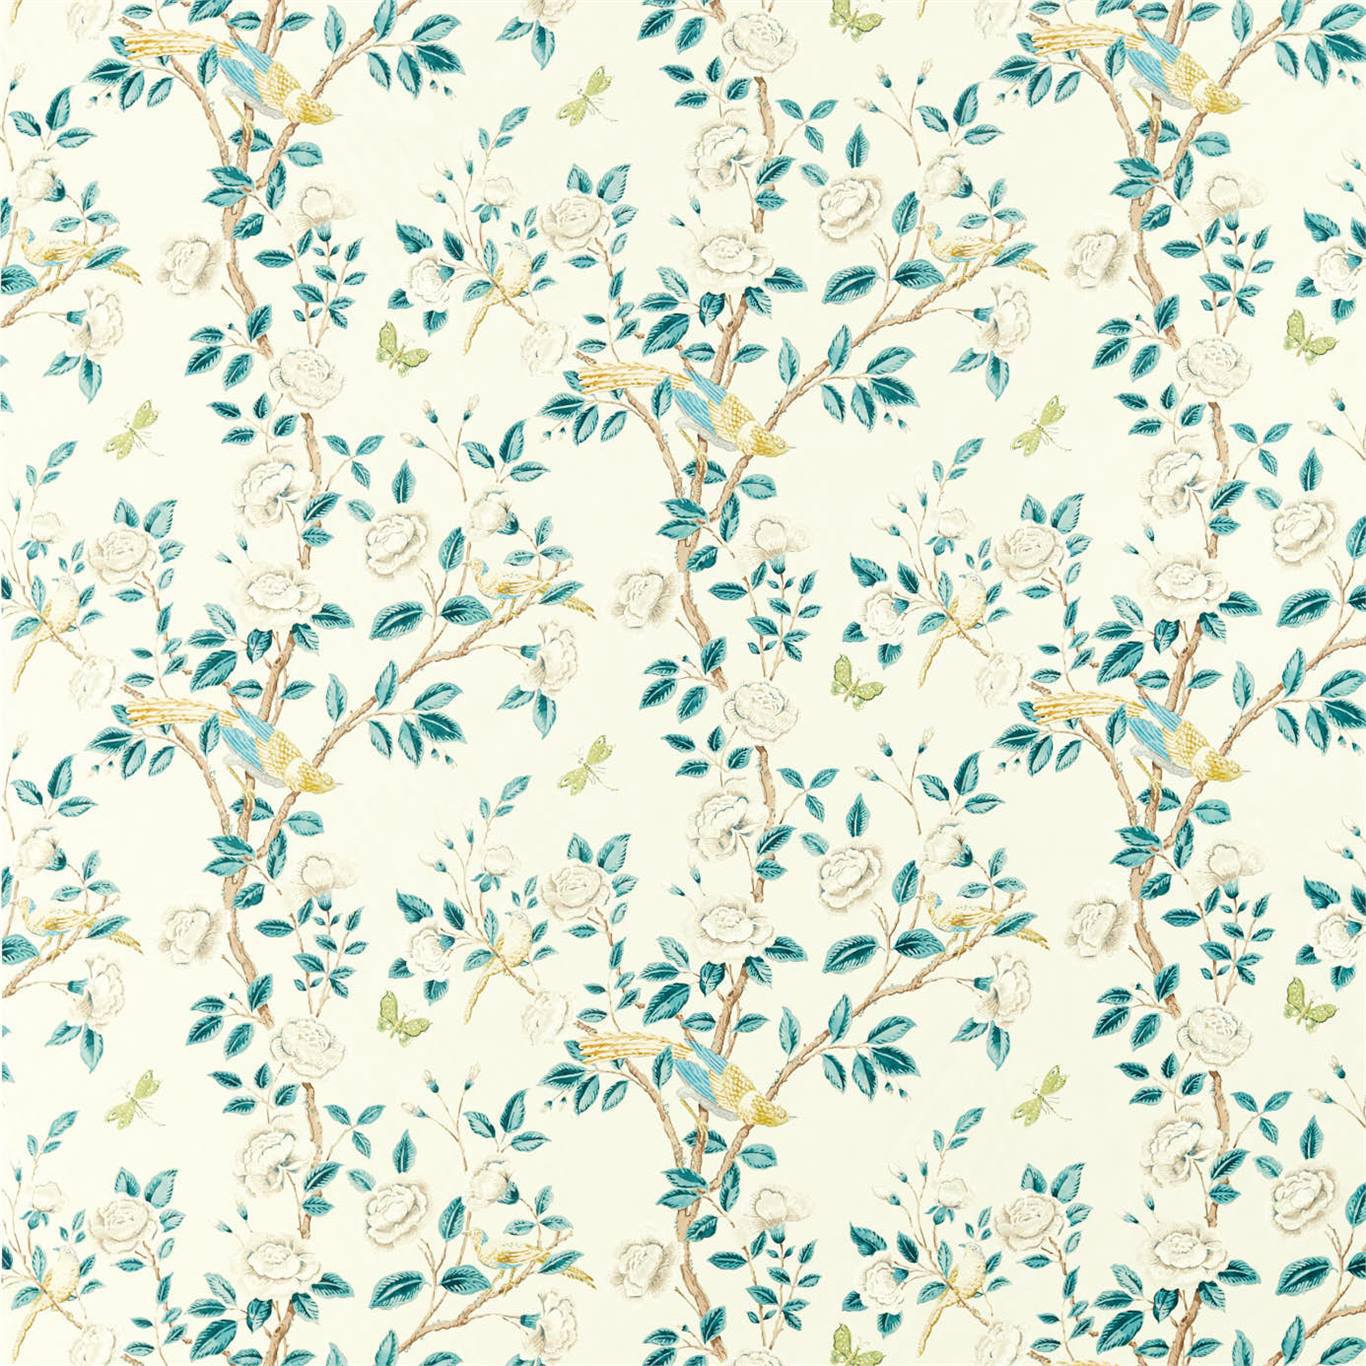 Andhara Fabric by Sanderson - DCEF226632 - Teal/Cream